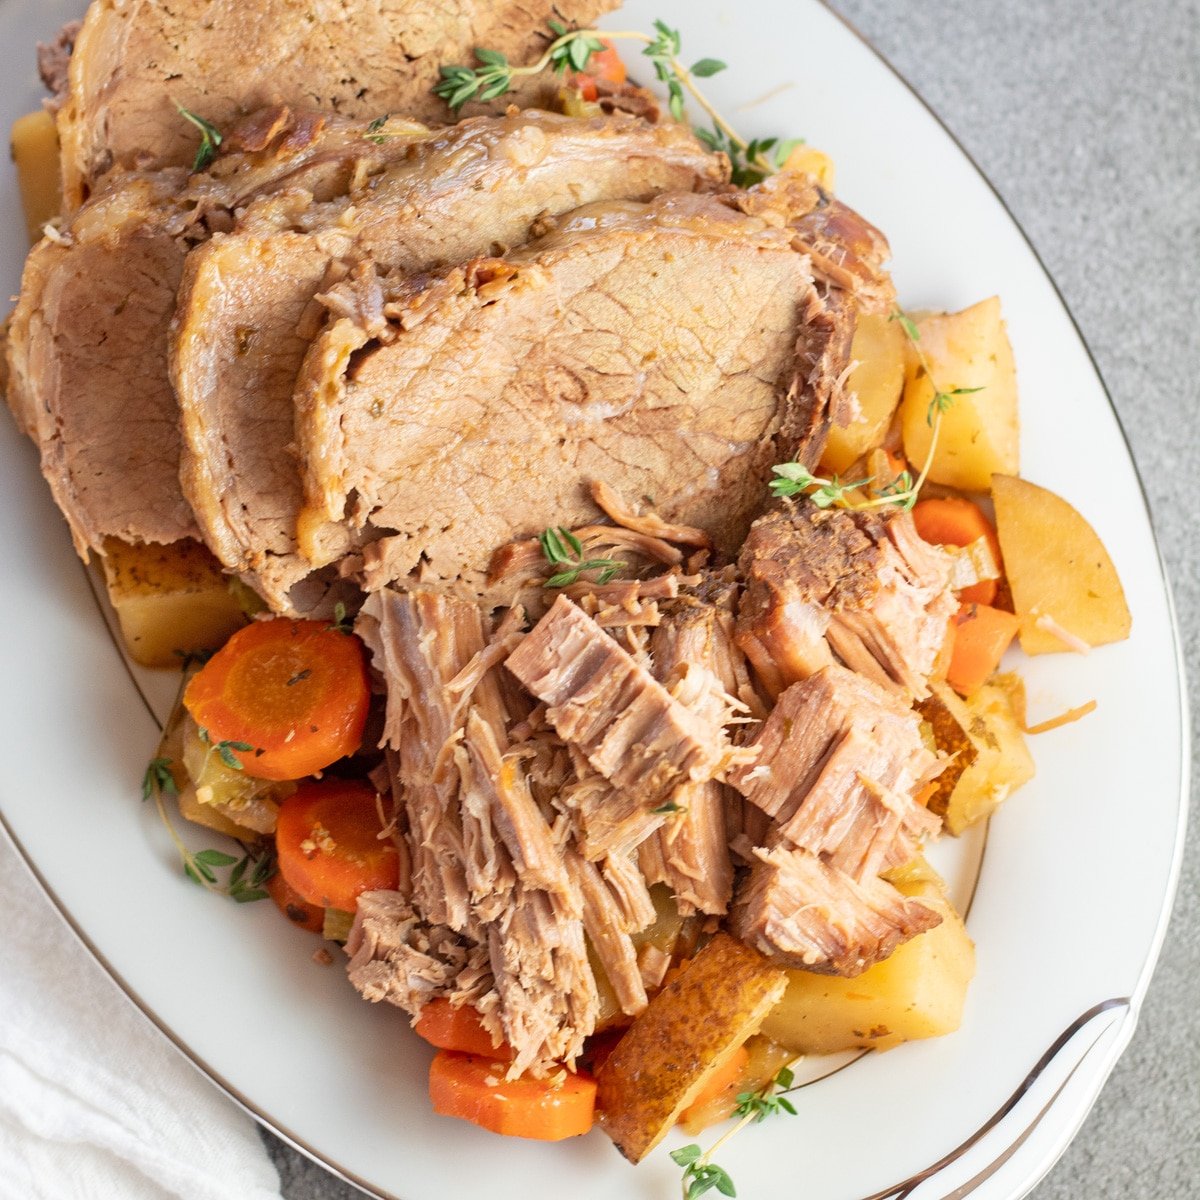 Slow Cooker Eye of Round Roast With Vegetables Recipe